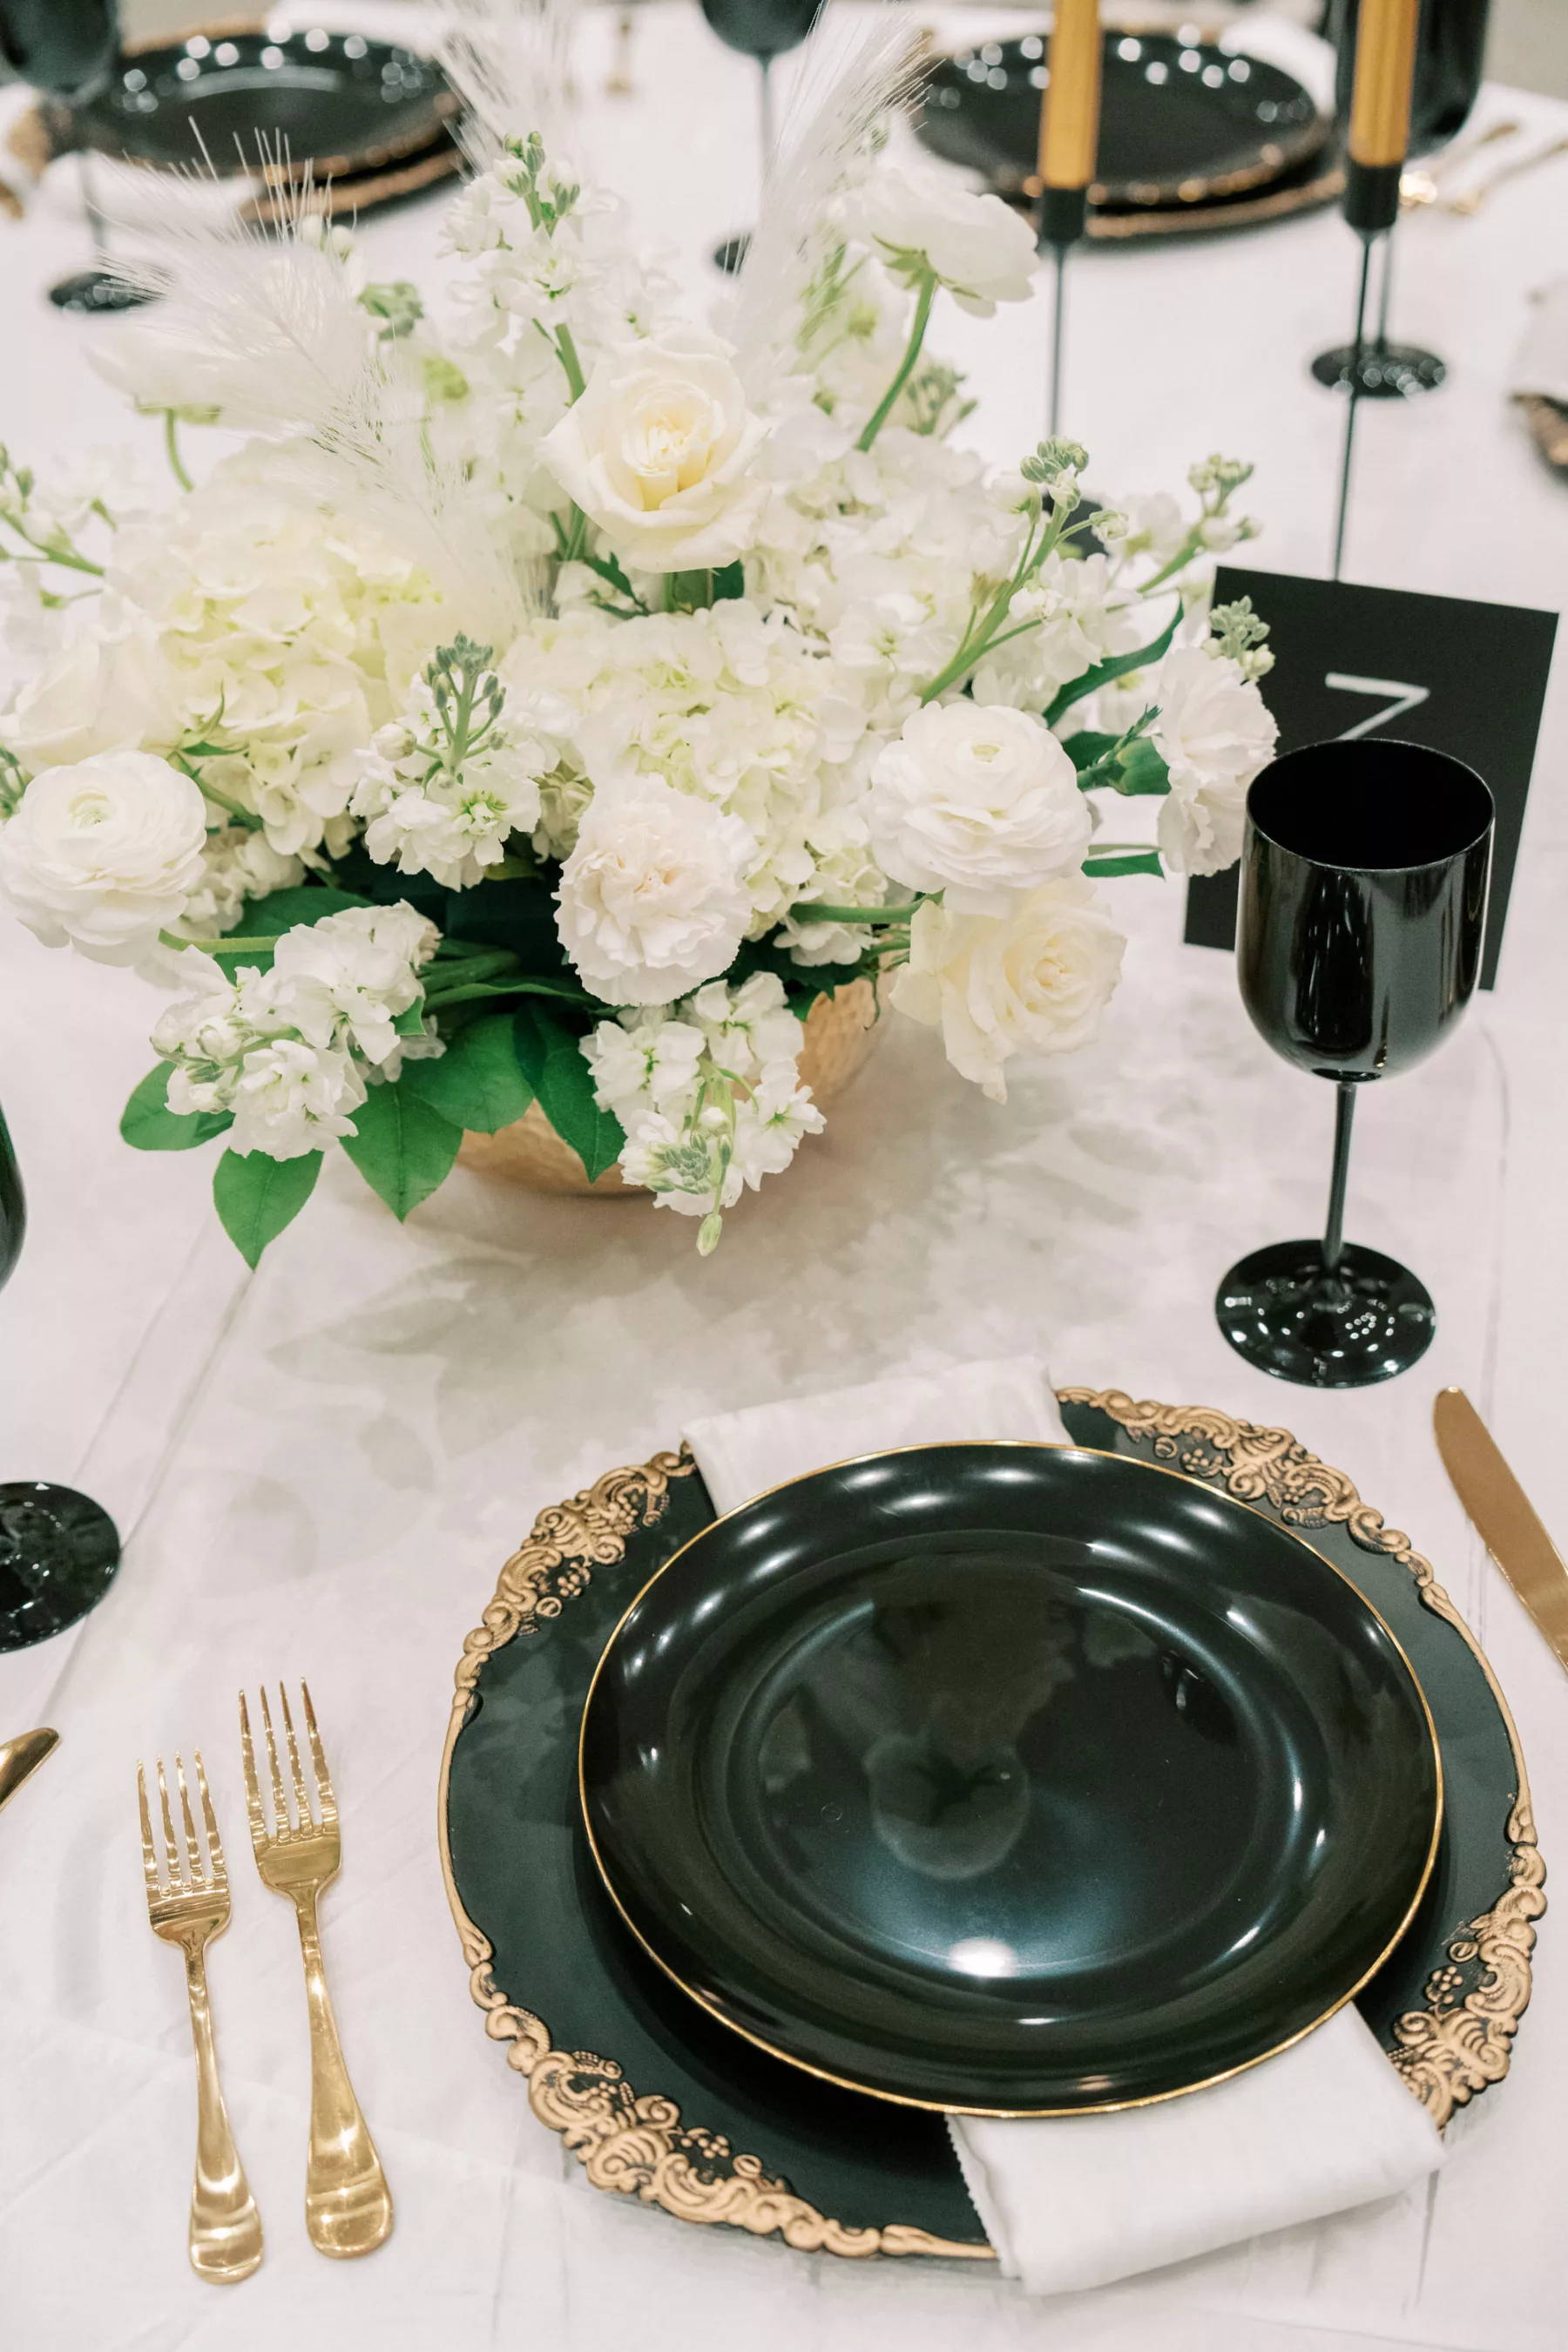 Great Gatsby Inspired Wedding Reception Tablescape Ideas | Black and Gold Vintage Chargers | Gold Flatware | White Roses, Hydrangeas, Stock Flowers, and Feathers Centerpiece Inspiration | Tampa Bay Outside The Box Rentals